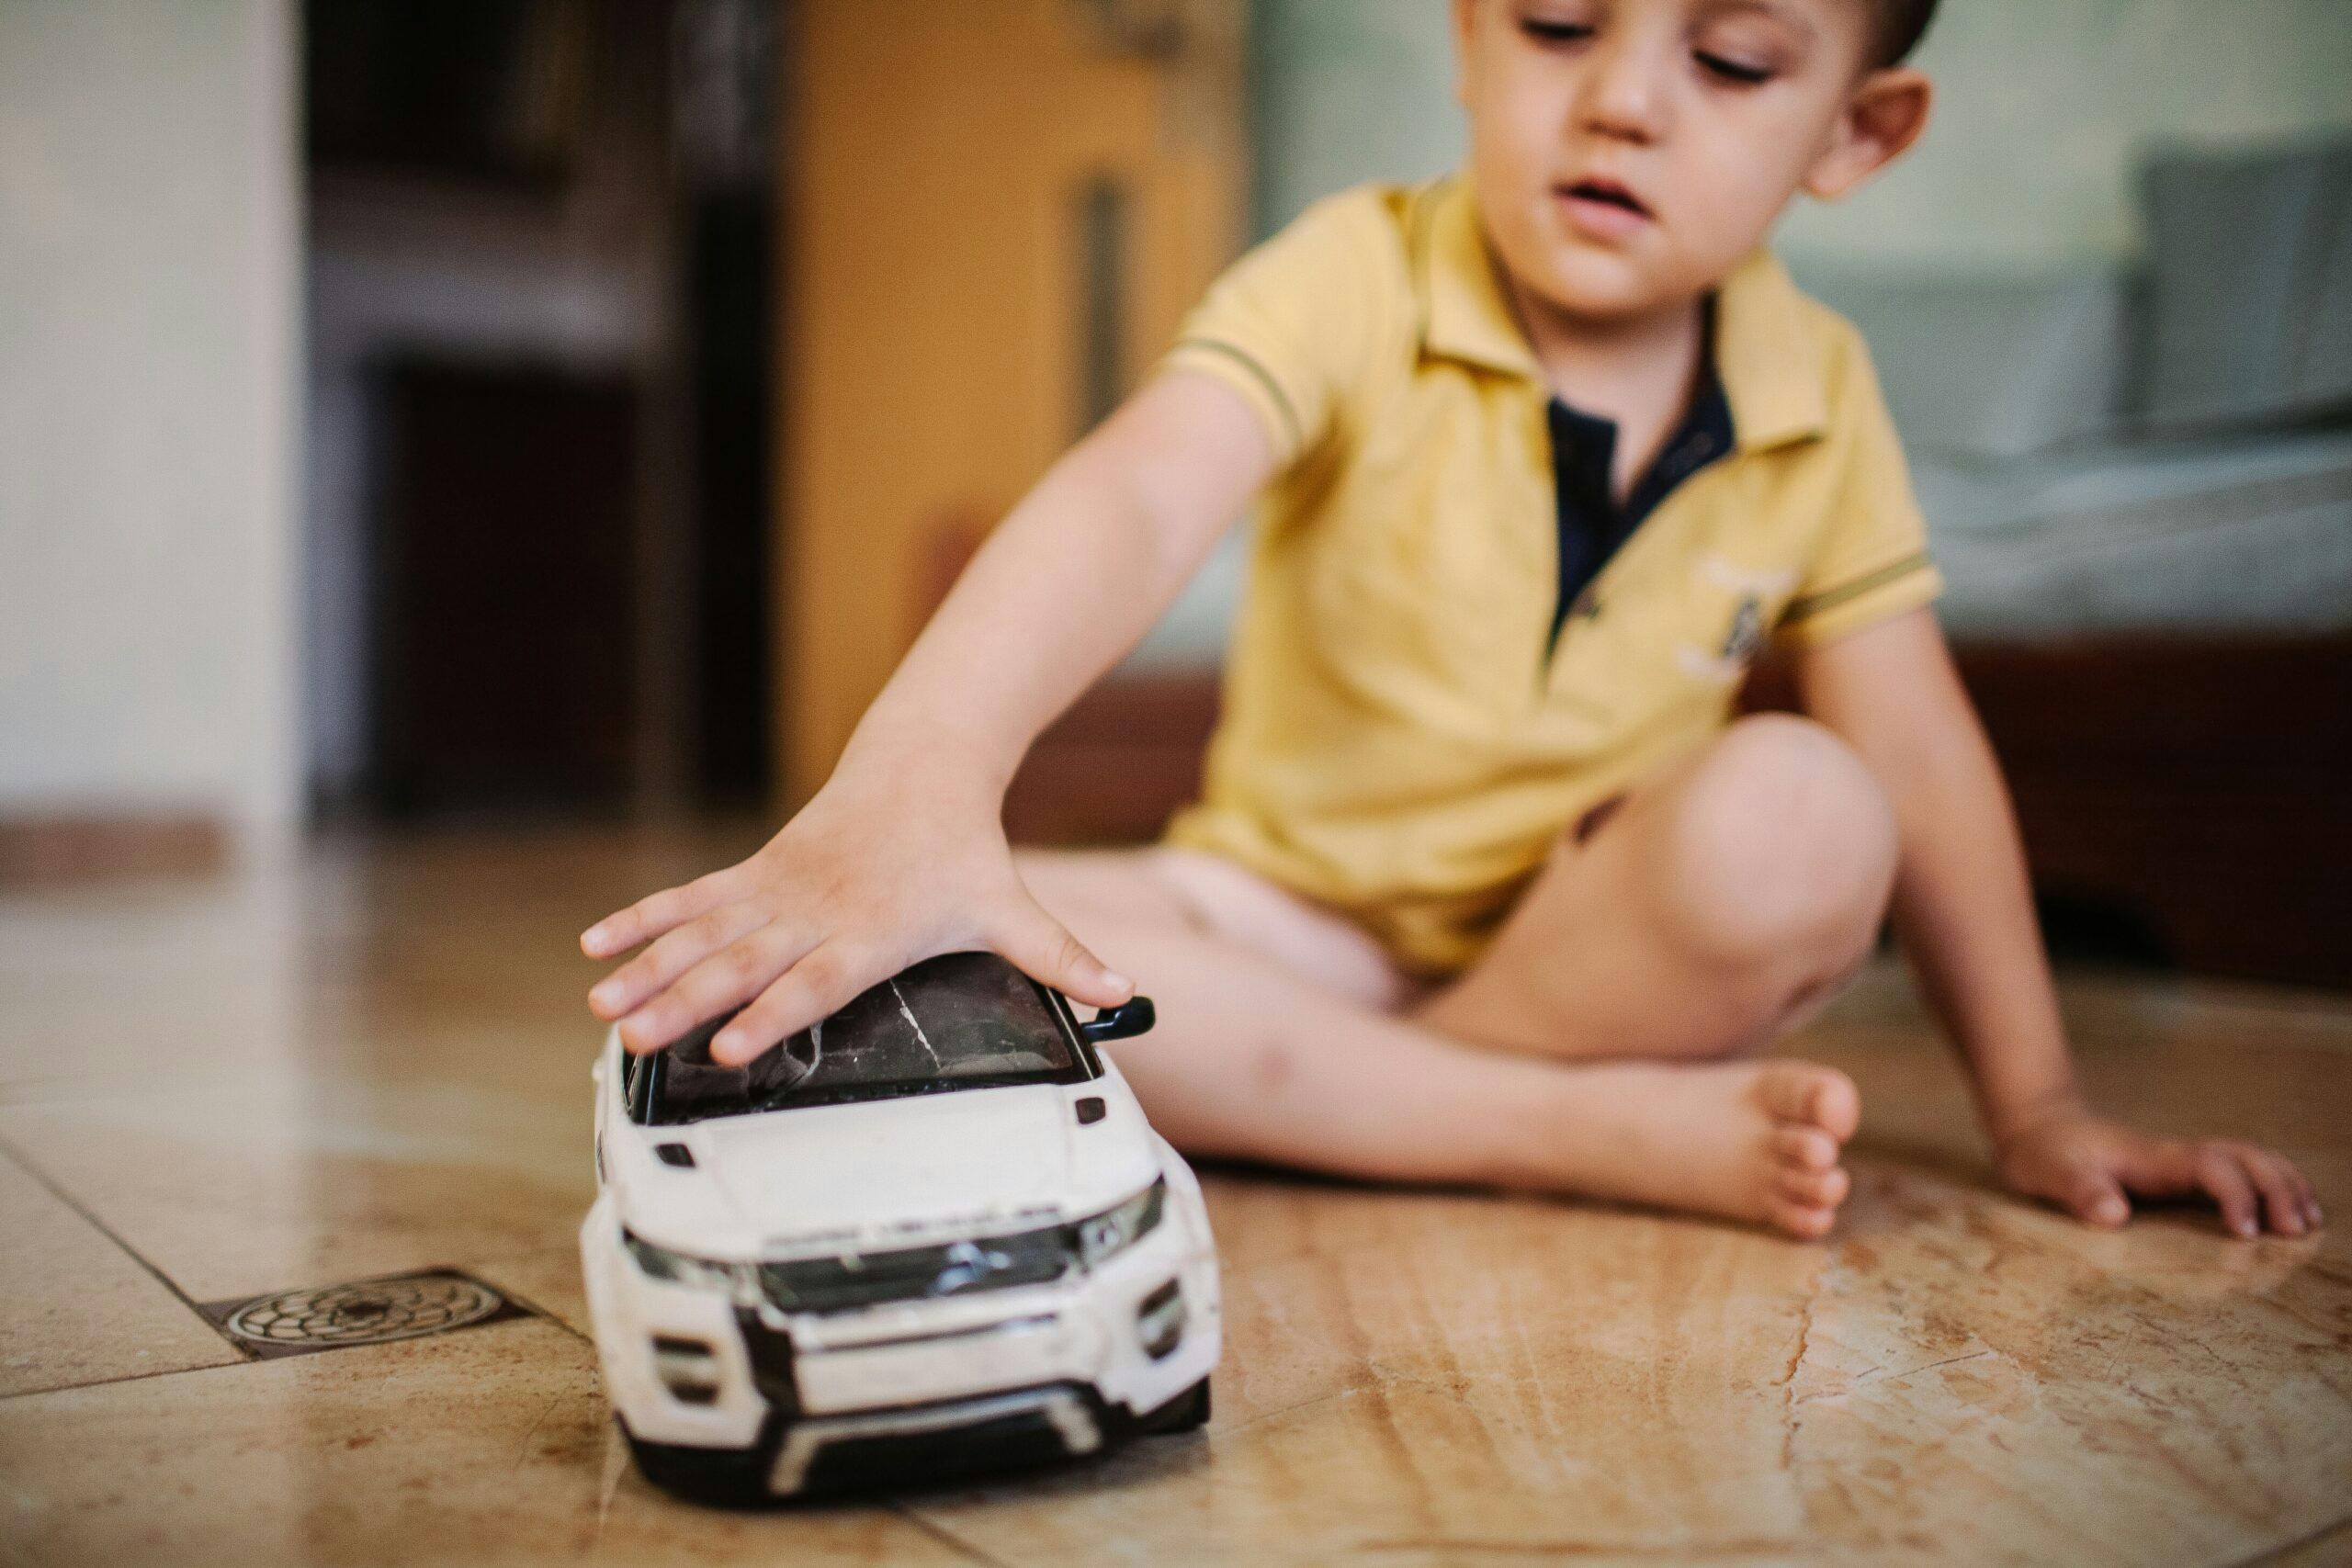 being-a-kid-on-the-ground-playing-car-toy-happy_t20_Blzr29